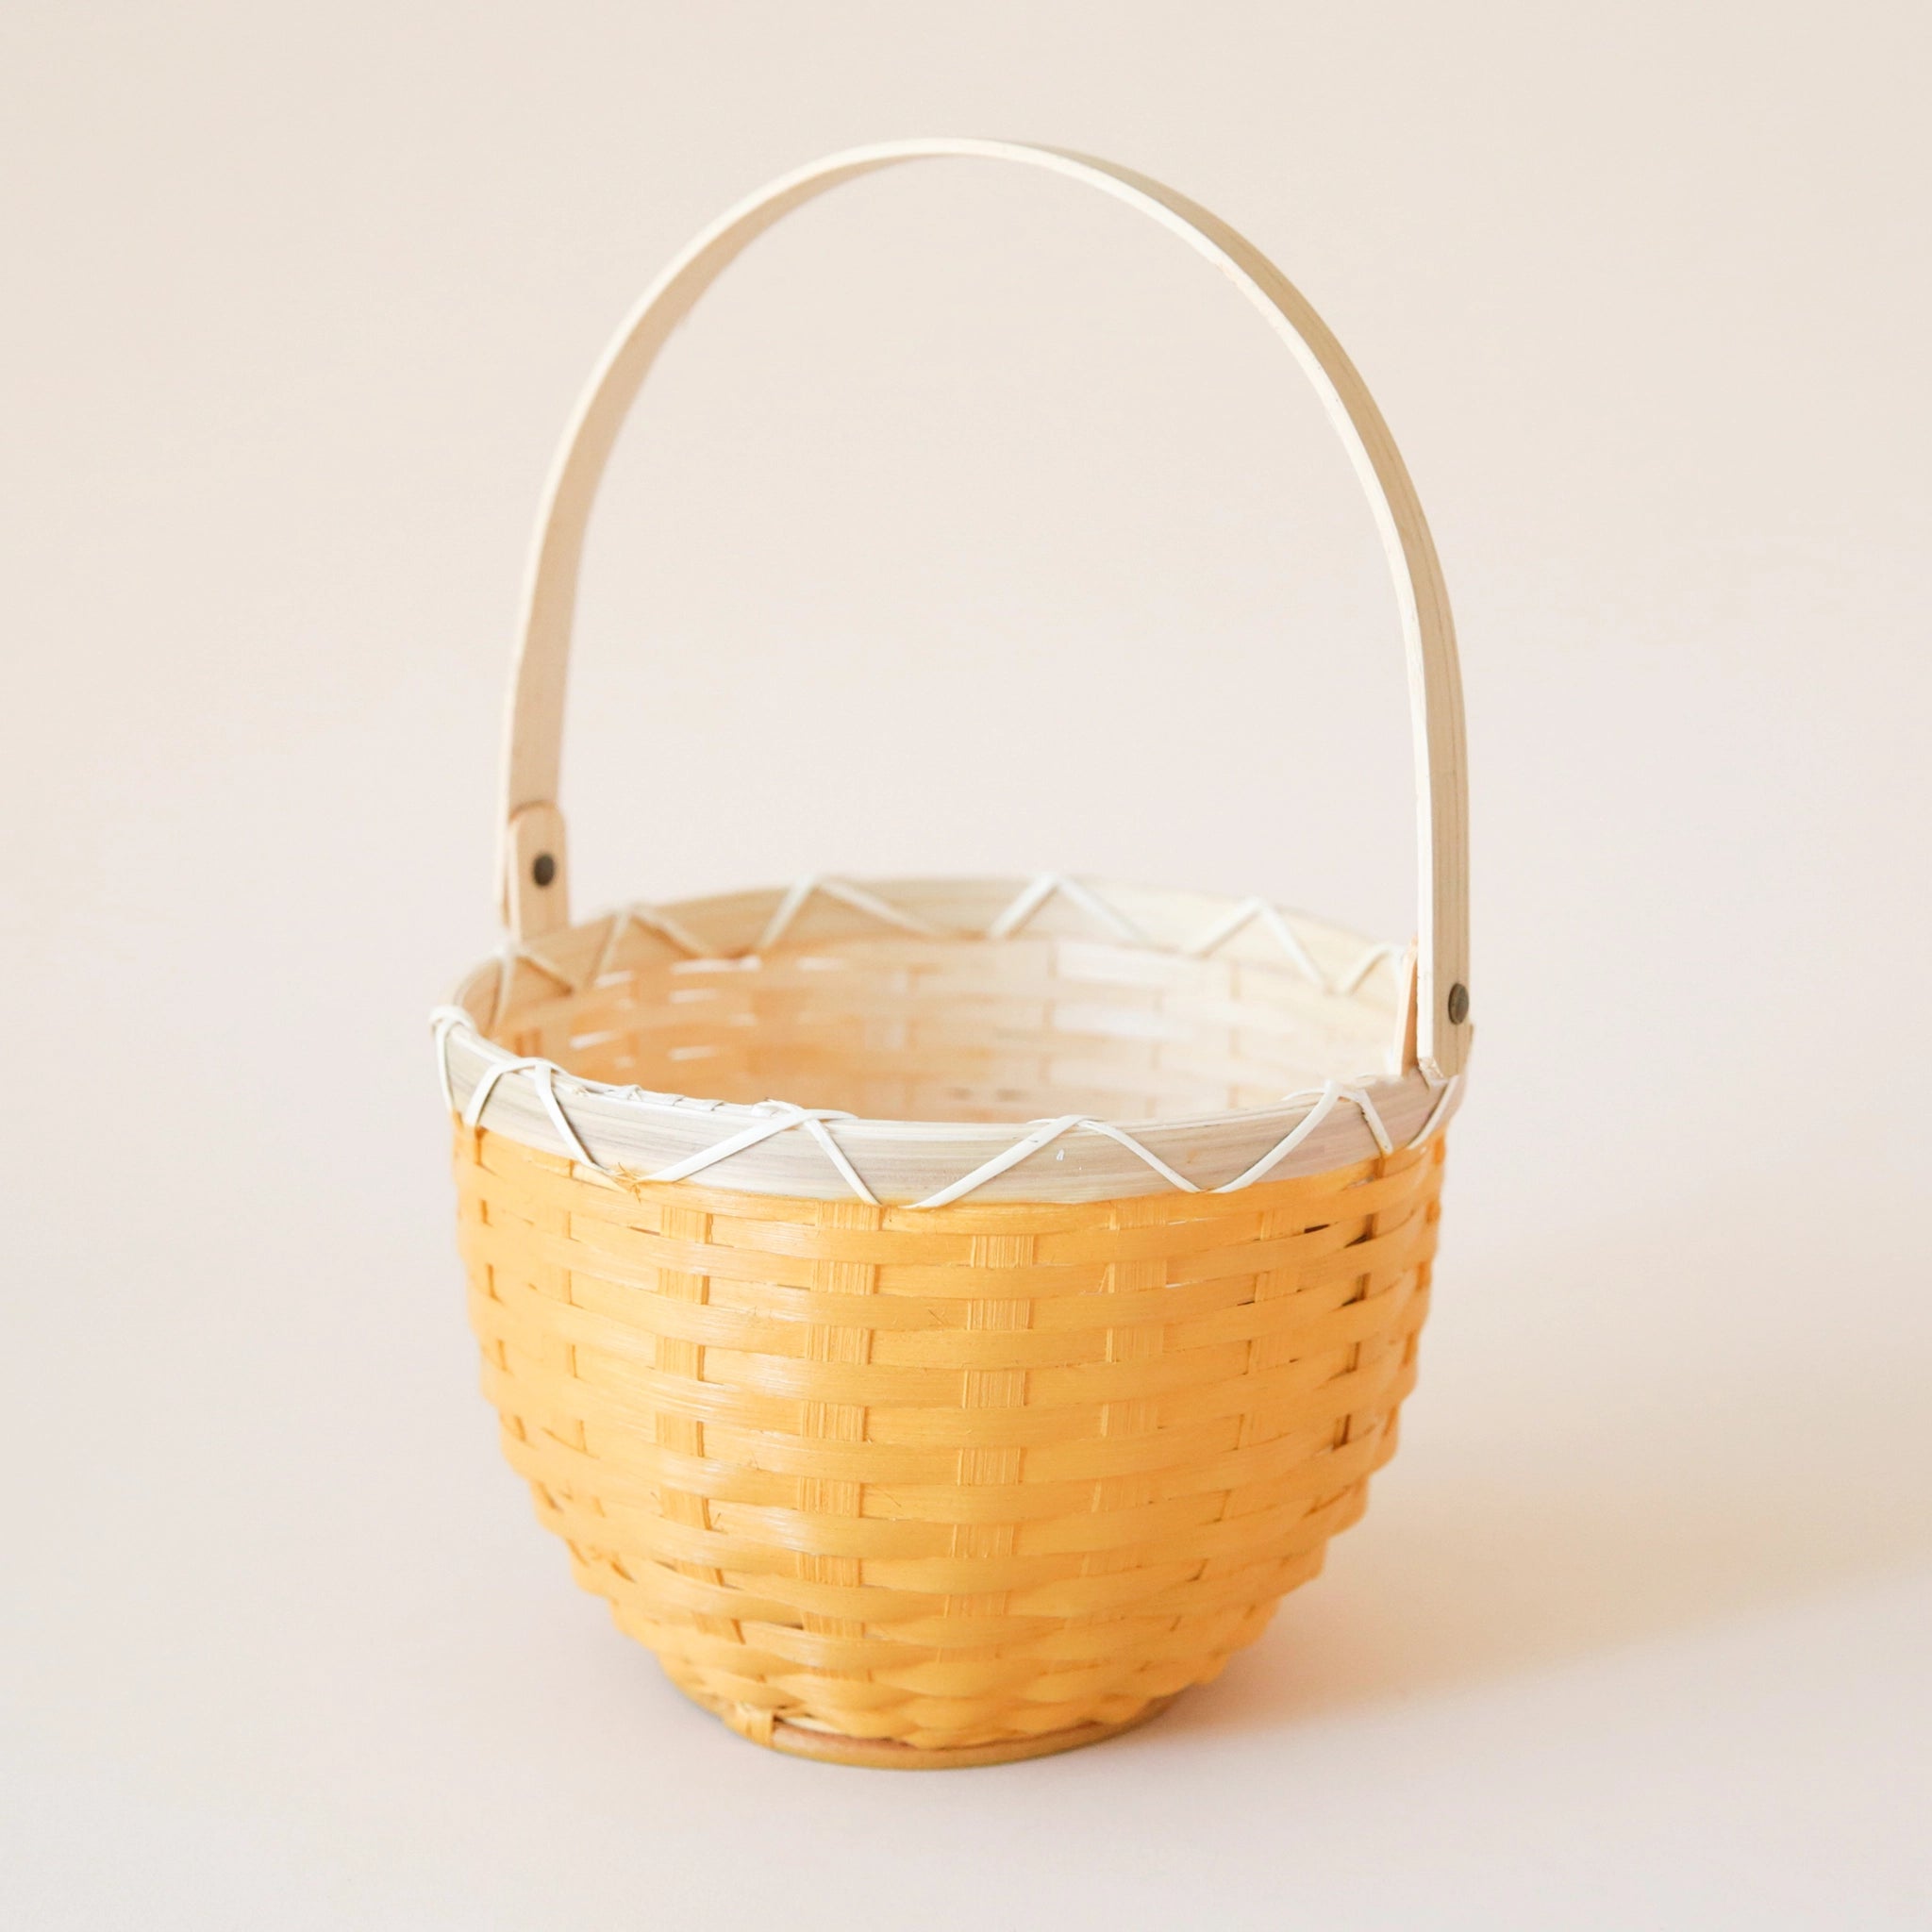 On a cream background is a yellow and cream woven rattan Easter basket. 